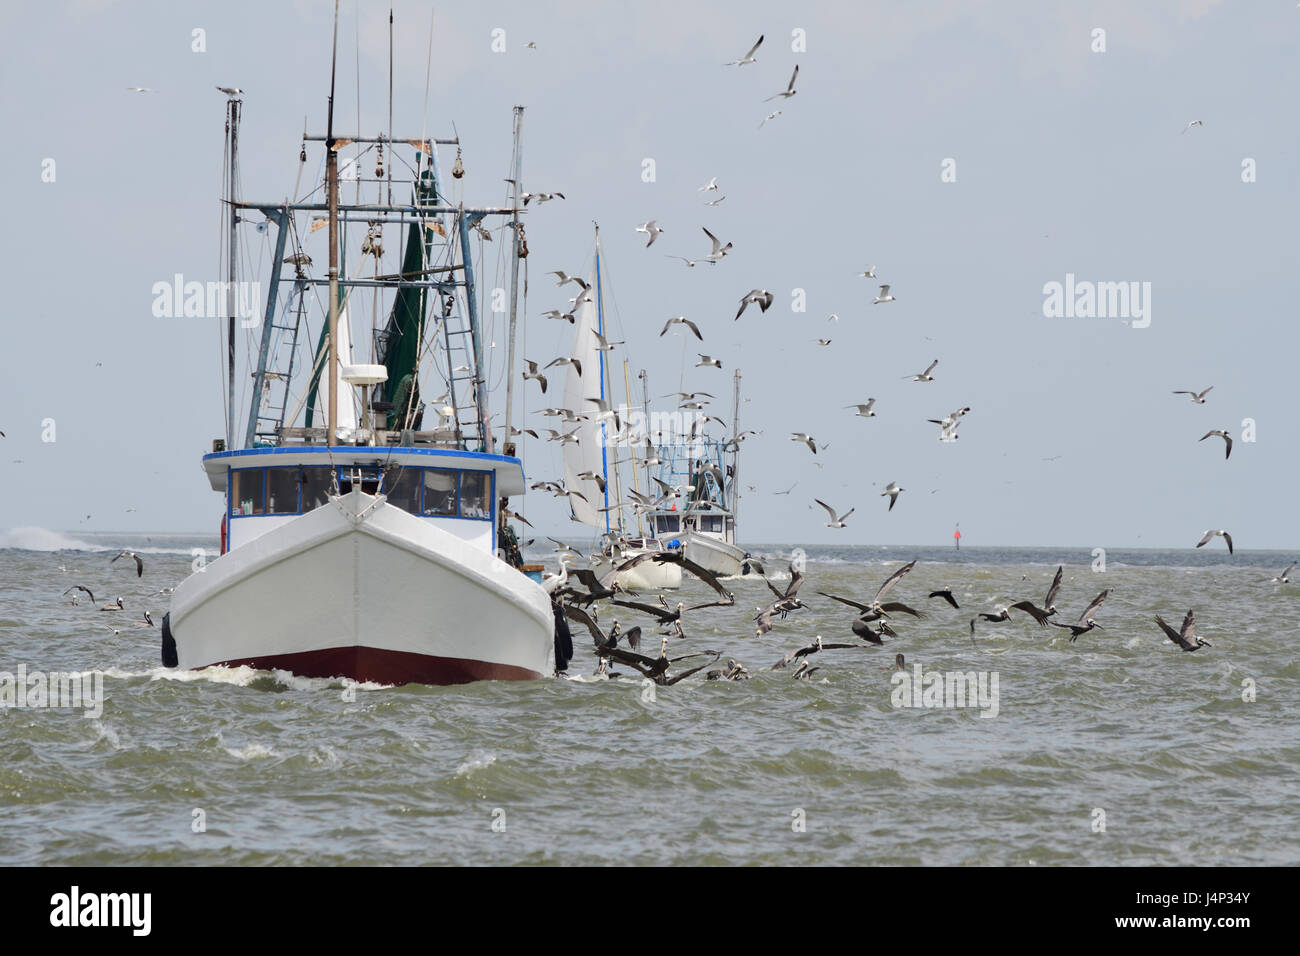 Fishing vessel and sailboats surrounded by sea birds Stock Photo